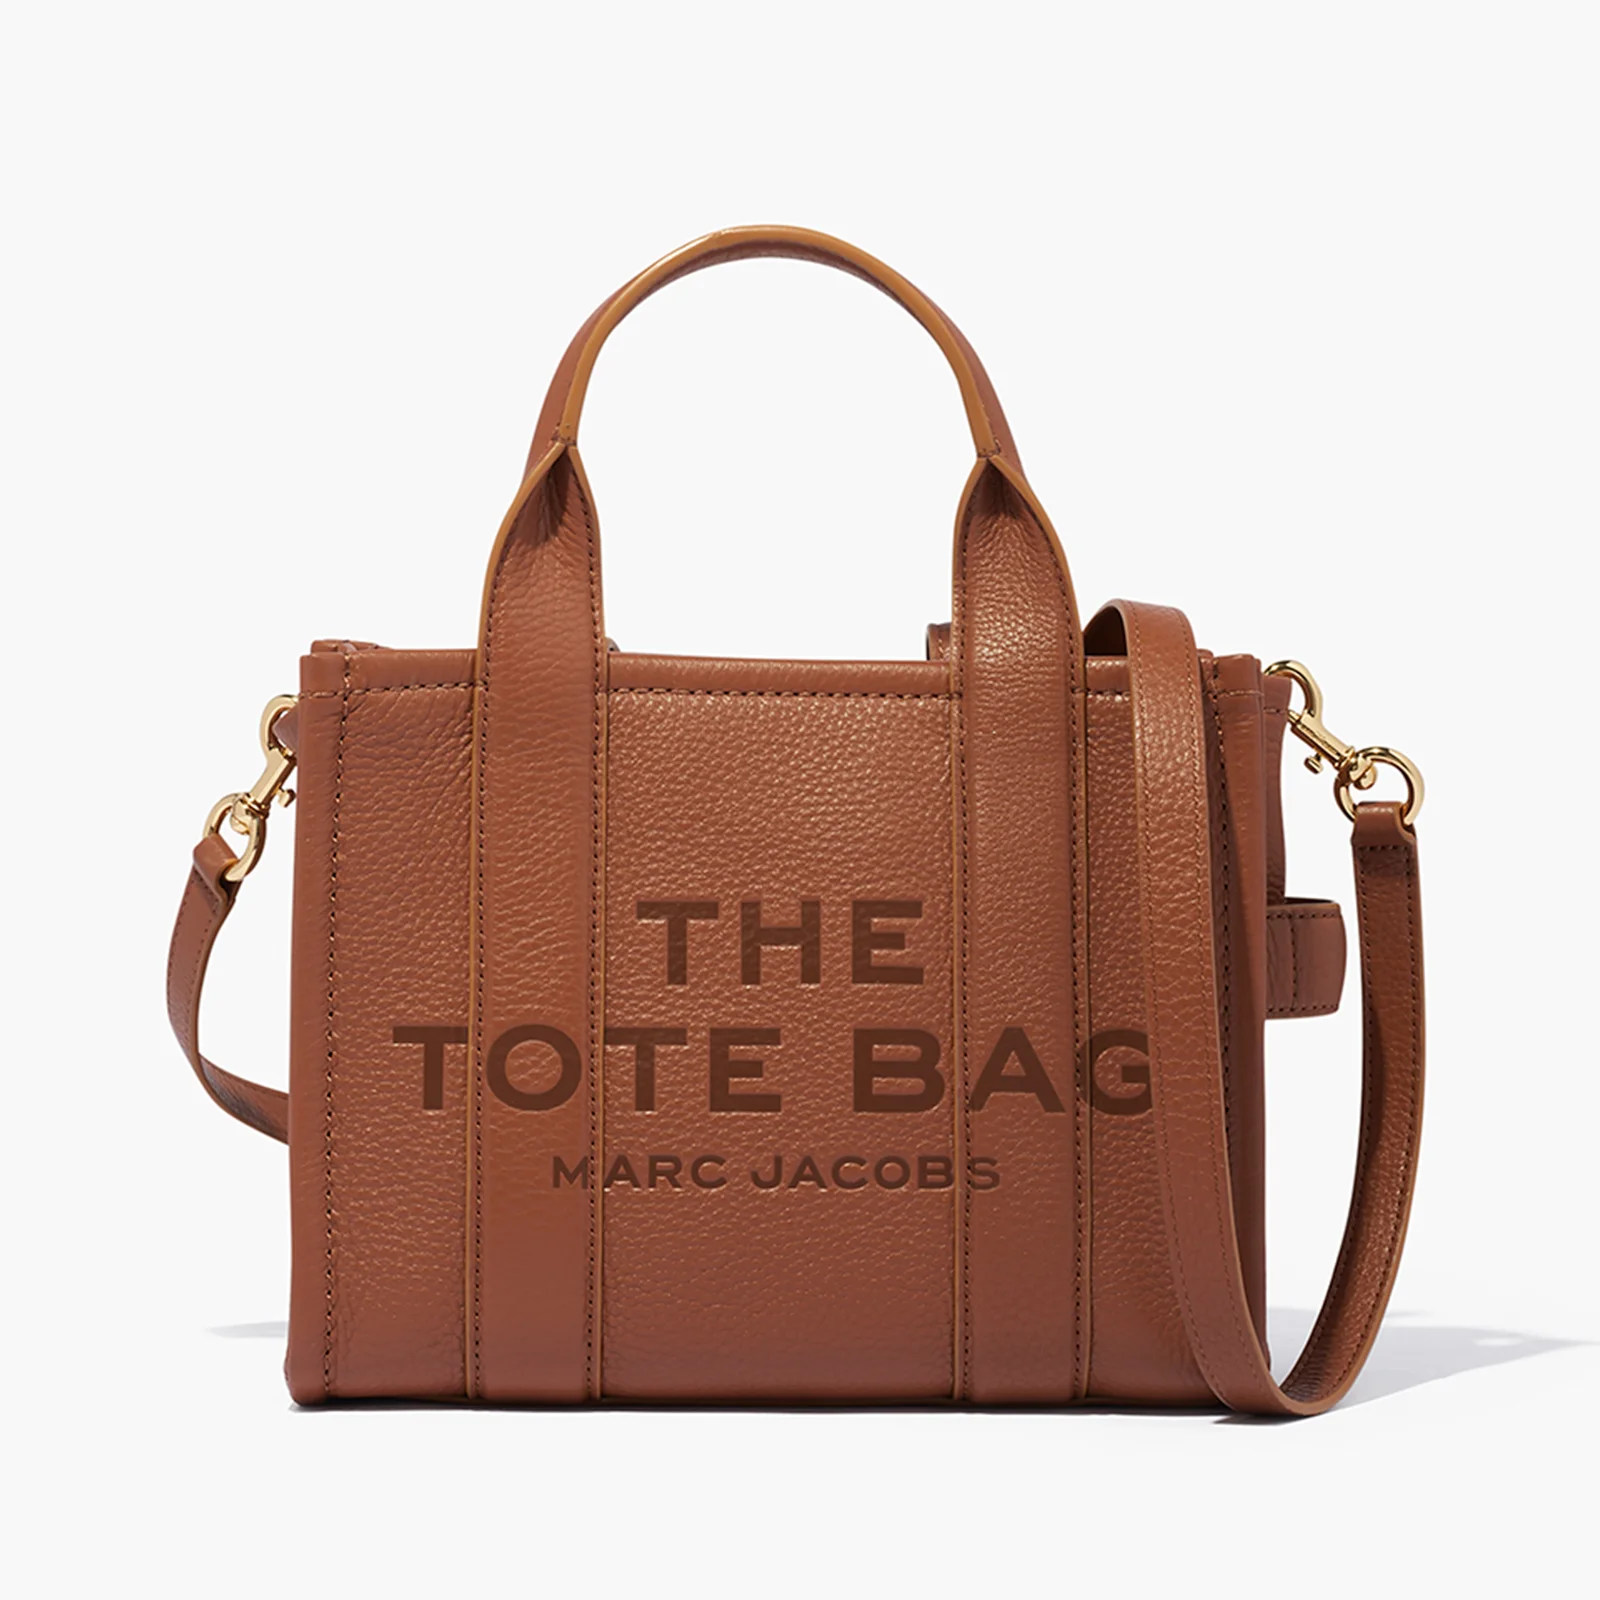 Marc Jacobs Women's The Small Leather Tote Bag - Argan Oil Image 1